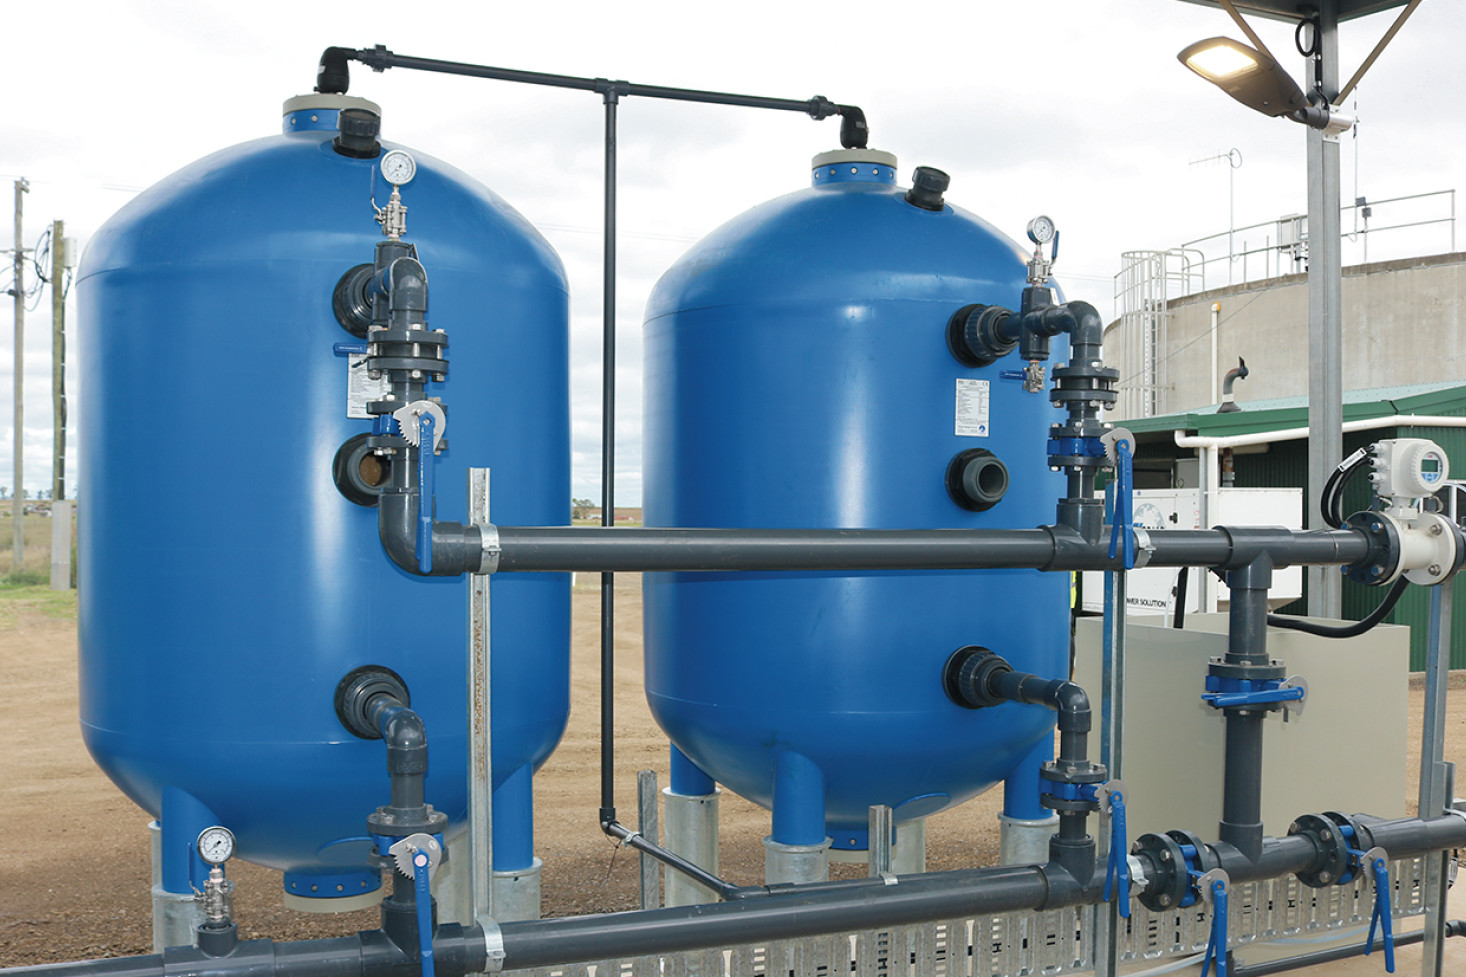 Before the reverse osmosis water treatment plant using GAB water was operational, Clifton’s water supply faced great uncertainty.